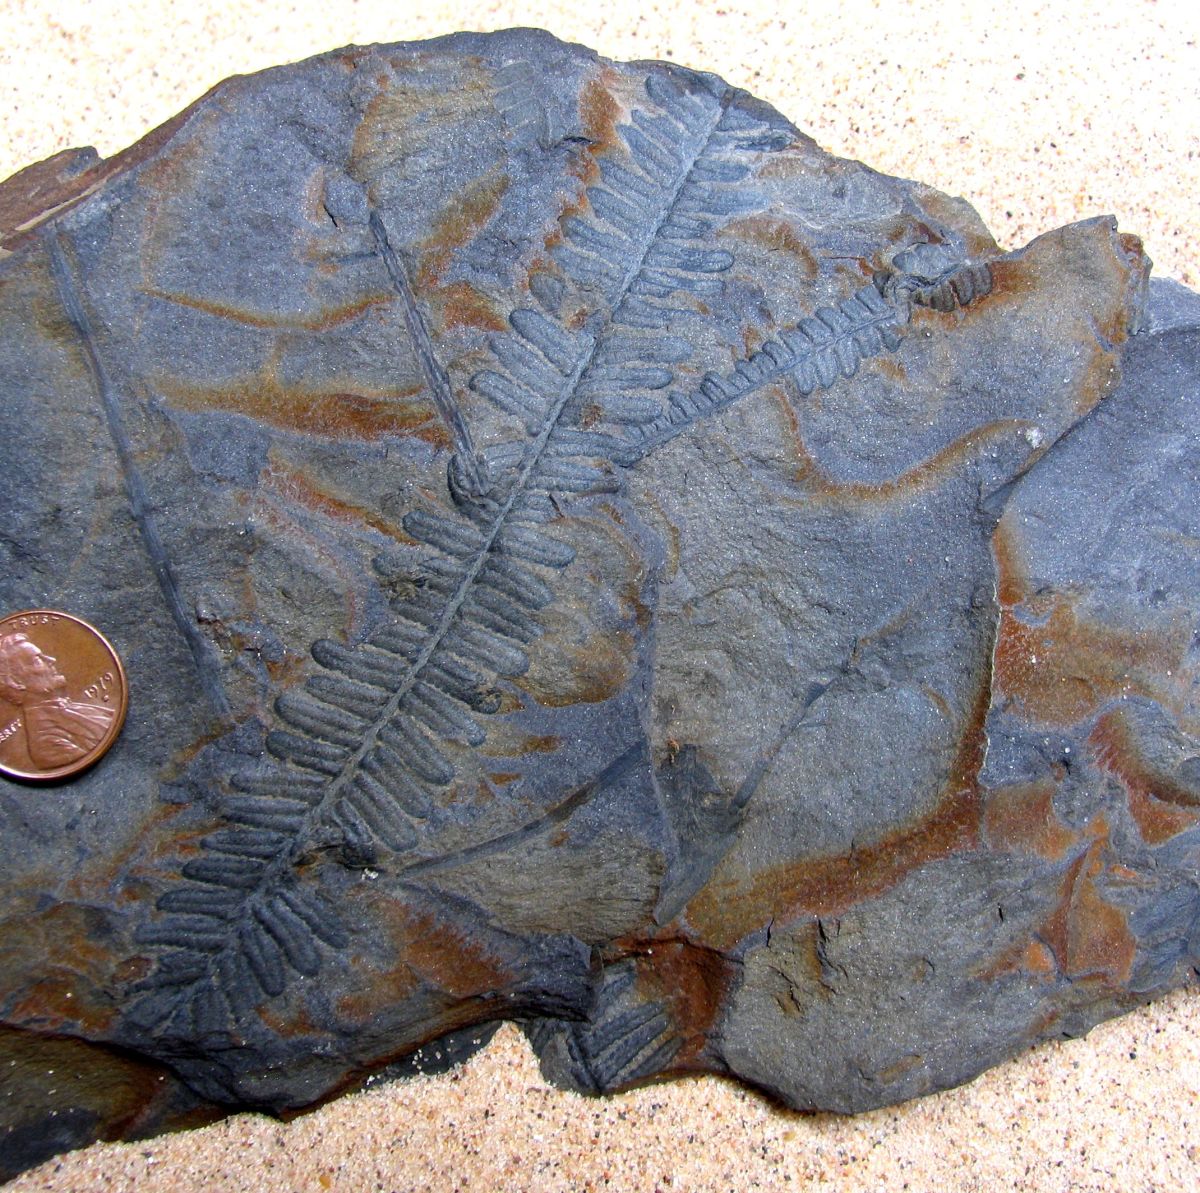 FOSSILIZED LEAF PRINT OF PECOPTERIS (FROM DEVONIAN SEED FERN TREE) ANCESTOR TO FLOWERING PLANTS